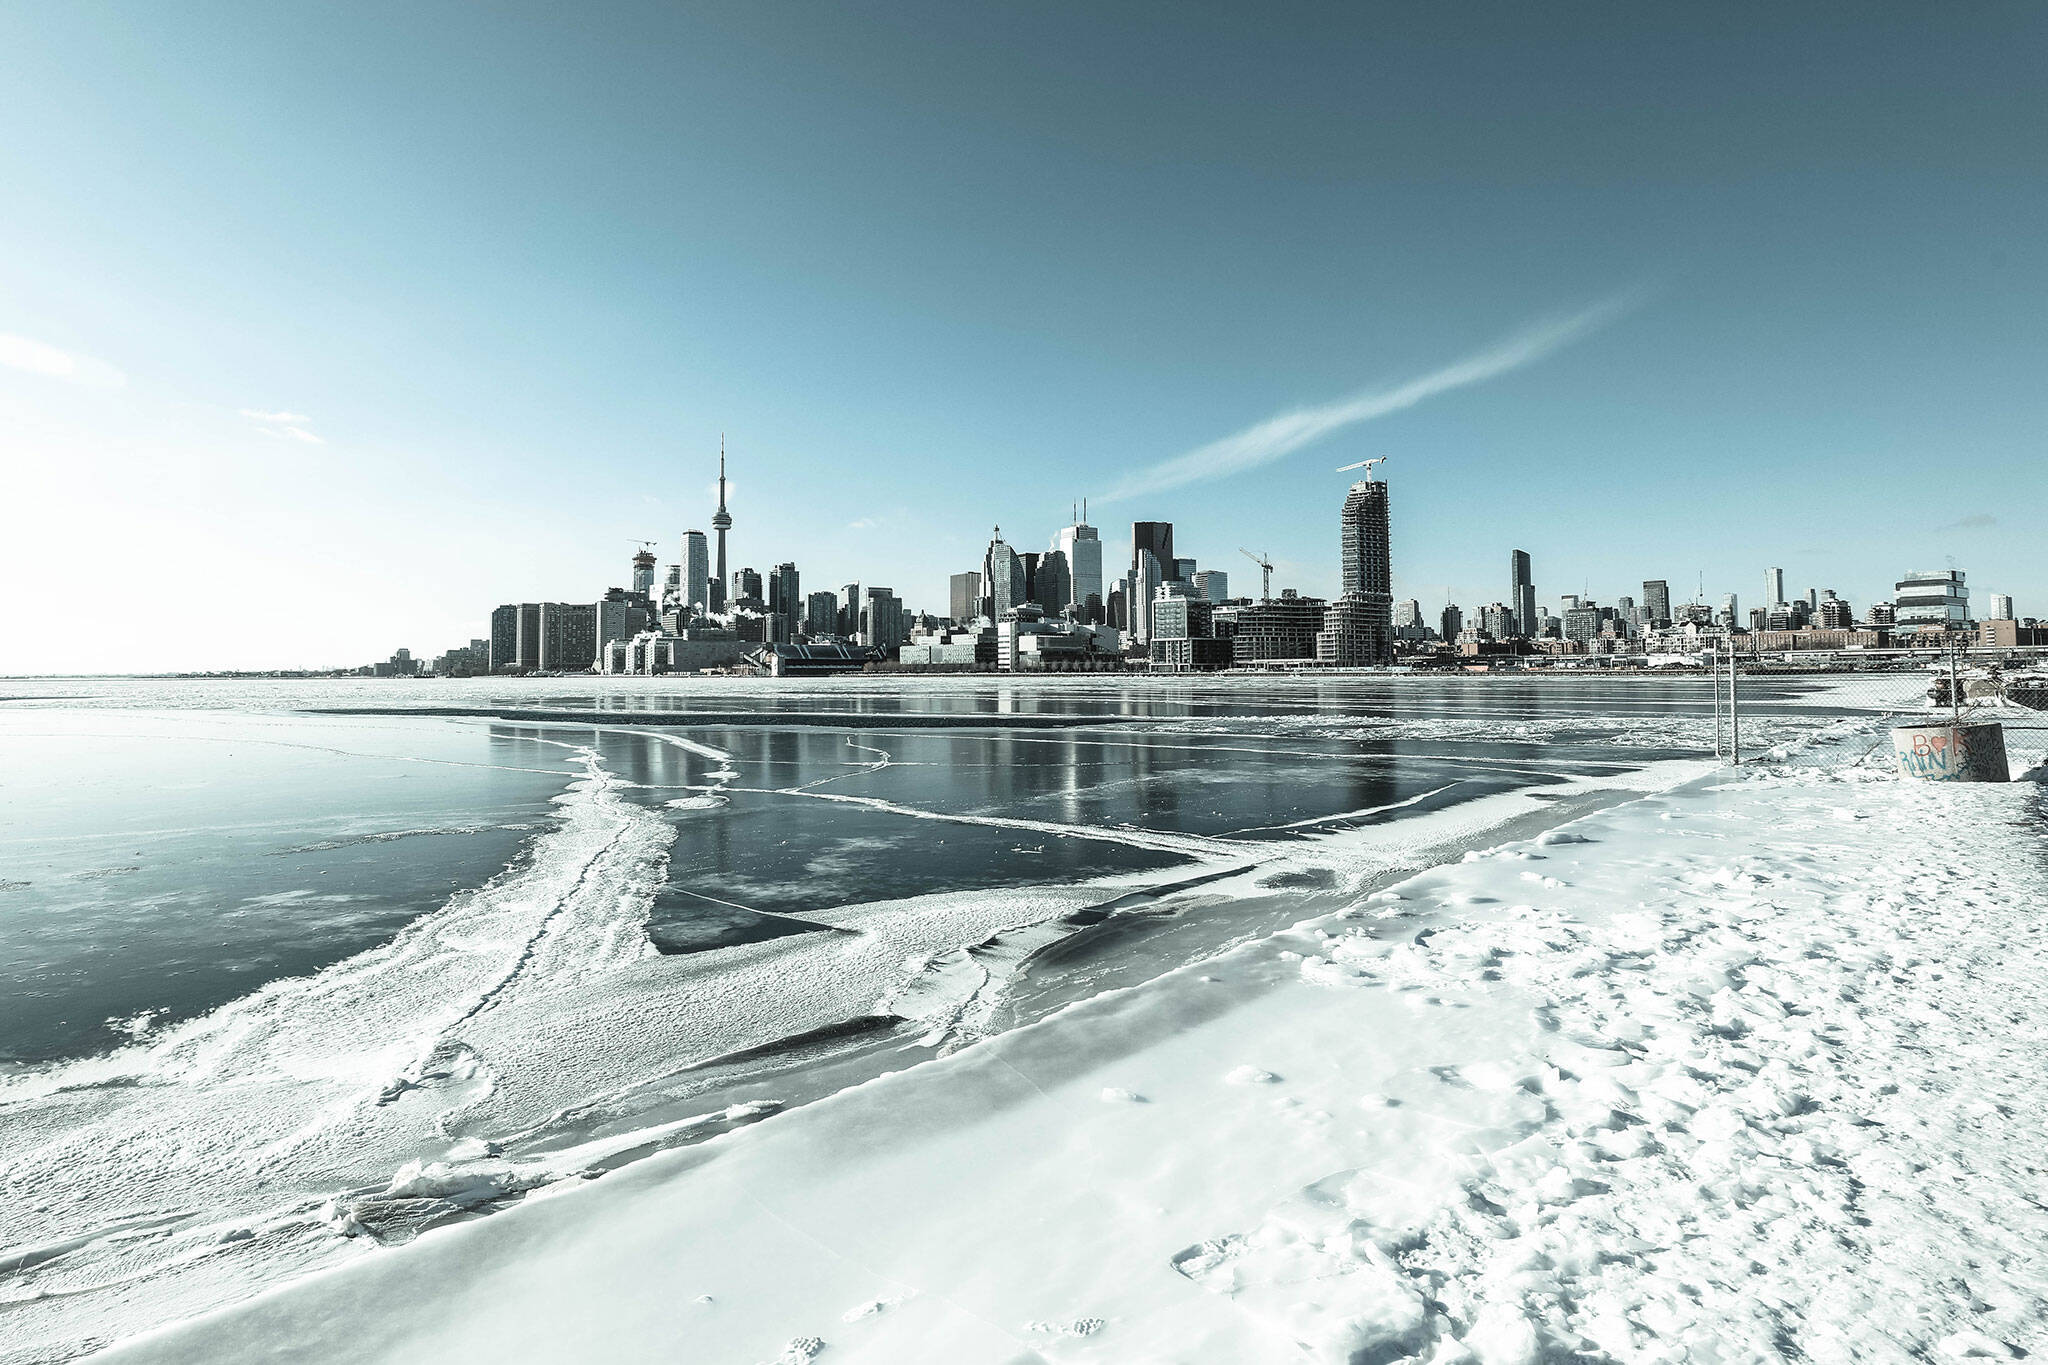 50 things to do this winter in Toronto